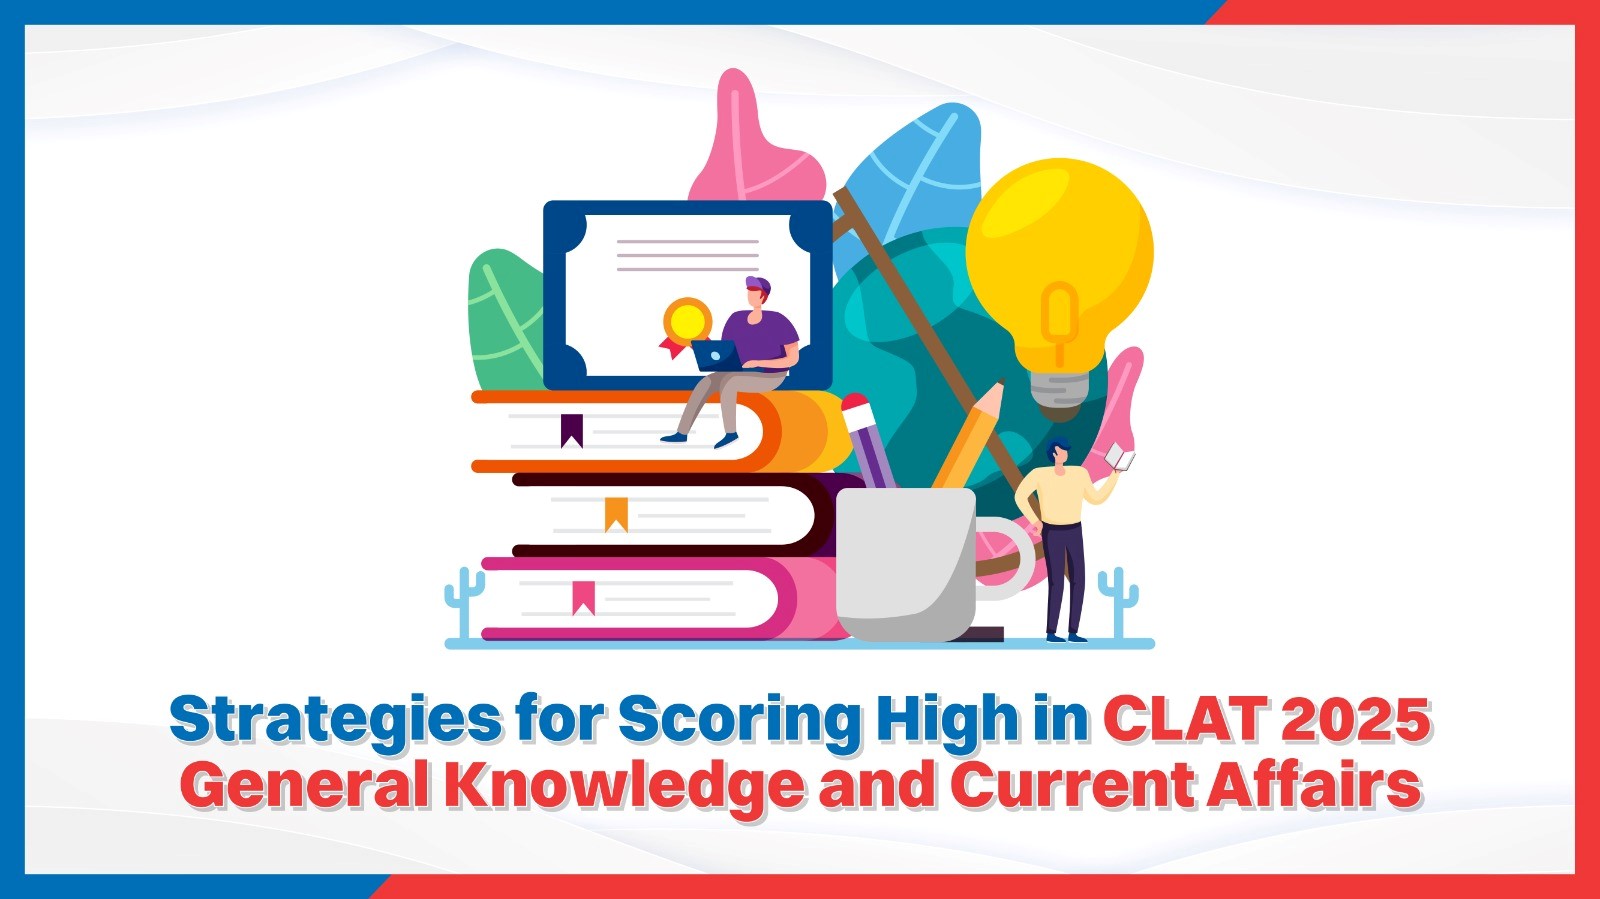 Mastering General Knowledge and Current Affairs for CLAT 2025